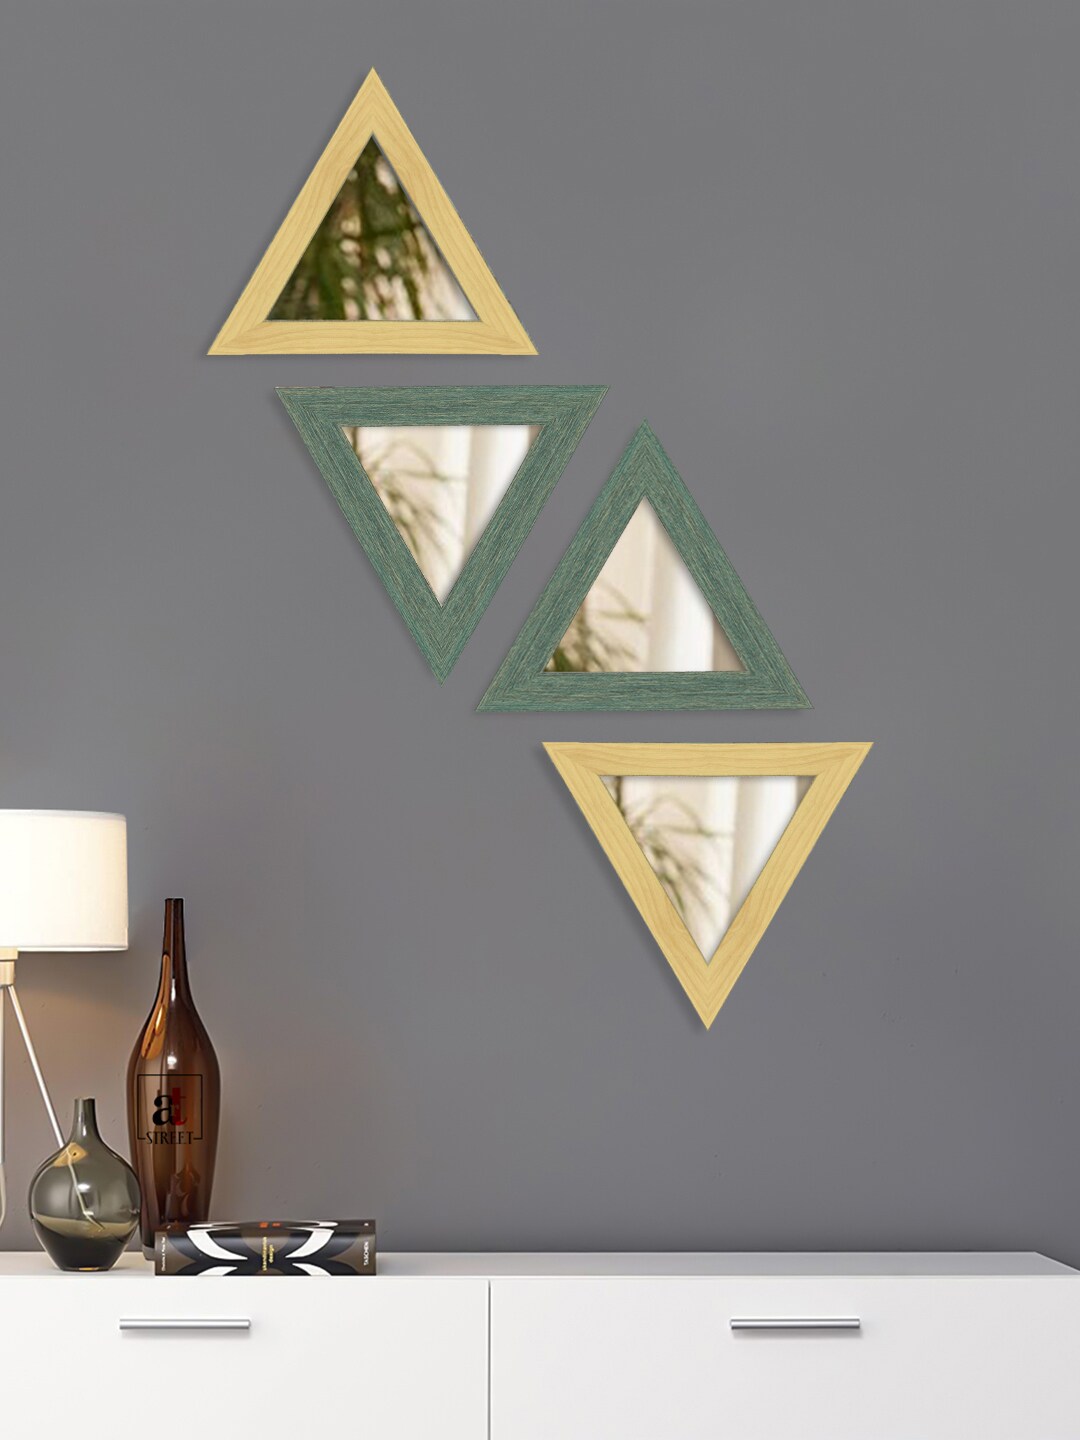 Art Street Set Of 4 Green & Beige Textured Decorative Triangle-Shaped Wall Mirrors Price in India